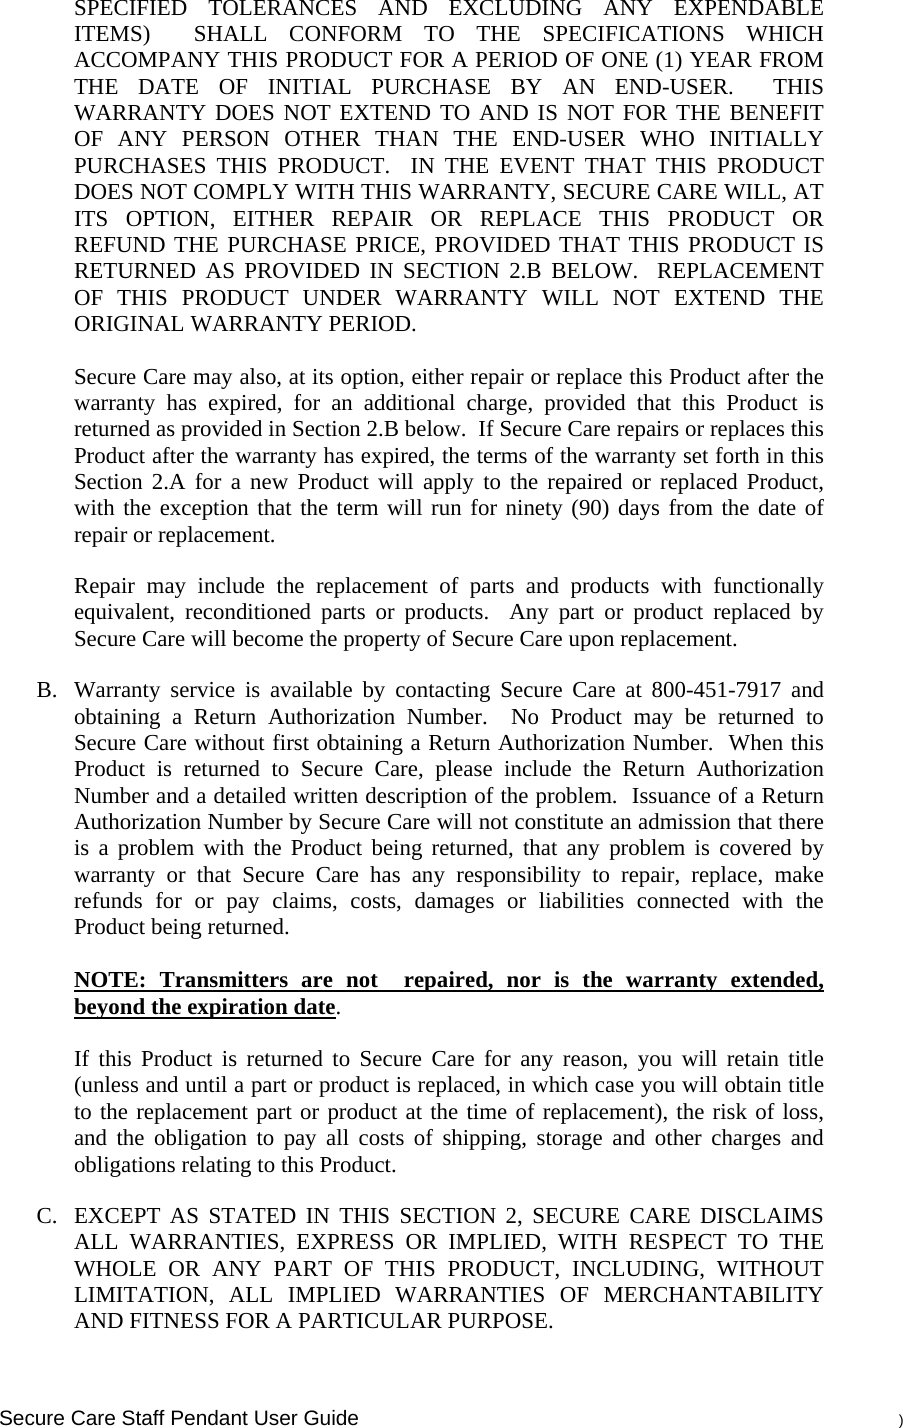    Secure Care Staff Pendant User Guide    ) SPECIFIED TOLERANCES AND EXCLUDING ANY EXPENDABLE ITEMS)  SHALL CONFORM TO THE SPECIFICATIONS WHICH ACCOMPANY THIS PRODUCT FOR A PERIOD OF ONE (1) YEAR FROM THE DATE OF INITIAL PURCHASE BY AN END-USER.  THIS WARRANTY DOES NOT EXTEND TO AND IS NOT FOR THE BENEFIT OF ANY PERSON OTHER THAN THE END-USER WHO INITIALLY PURCHASES THIS PRODUCT.  IN THE EVENT THAT THIS PRODUCT DOES NOT COMPLY WITH THIS WARRANTY, SECURE CARE WILL, AT ITS OPTION, EITHER REPAIR OR REPLACE THIS PRODUCT OR REFUND THE PURCHASE PRICE, PROVIDED THAT THIS PRODUCT IS RETURNED AS PROVIDED IN SECTION 2.B BELOW.  REPLACEMENT OF THIS PRODUCT UNDER WARRANTY WILL NOT EXTEND THE ORIGINAL WARRANTY PERIOD.  Secure Care may also, at its option, either repair or replace this Product after the warranty has expired, for an additional charge, provided that this Product is returned as provided in Section 2.B below.  If Secure Care repairs or replaces this Product after the warranty has expired, the terms of the warranty set forth in this Section 2.A for a new Product will apply to the repaired or replaced Product, with the exception that the term will run for ninety (90) days from the date of repair or replacement. Repair may include the replacement of parts and products with functionally equivalent, reconditioned parts or products.  Any part or product replaced by Secure Care will become the property of Secure Care upon replacement. B. Warranty service is available by contacting Secure Care at 800-451-7917 and obtaining a Return Authorization Number.  No Product may be returned to Secure Care without first obtaining a Return Authorization Number.  When this Product is returned to Secure Care, please include the Return Authorization Number and a detailed written description of the problem.  Issuance of a Return Authorization Number by Secure Care will not constitute an admission that there is a problem with the Product being returned, that any problem is covered by warranty or that Secure Care has any responsibility to repair, replace, make refunds for or pay claims, costs, damages or liabilities connected with the Product being returned.   NOTE: Transmitters are not  repaired, nor is the warranty extended, beyond the expiration date.  If this Product is returned to Secure Care for any reason, you will retain title (unless and until a part or product is replaced, in which case you will obtain title to the replacement part or product at the time of replacement), the risk of loss, and the obligation to pay all costs of shipping, storage and other charges and obligations relating to this Product. C. EXCEPT AS STATED IN THIS SECTION 2, SECURE CARE DISCLAIMS ALL WARRANTIES, EXPRESS OR IMPLIED, WITH RESPECT TO THE WHOLE OR ANY PART OF THIS PRODUCT, INCLUDING, WITHOUT LIMITATION, ALL IMPLIED WARRANTIES OF MERCHANTABILITY AND FITNESS FOR A PARTICULAR PURPOSE.   